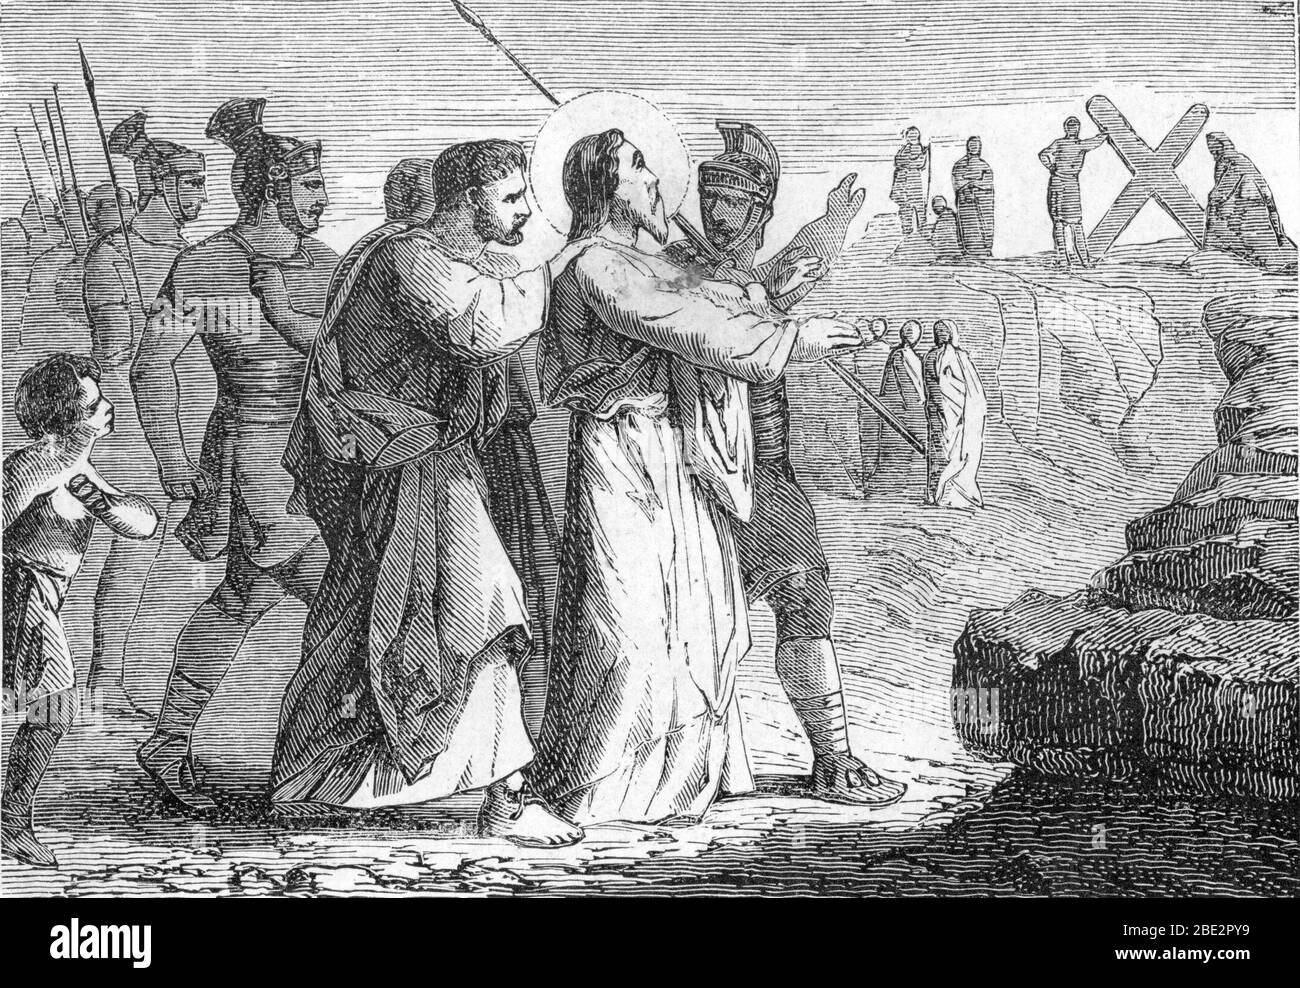 Representation du martyre de saint Andre (1er siecle) (martyrdom of Andrew the Apostle) Engraving 19th century Private collection Stock Photo